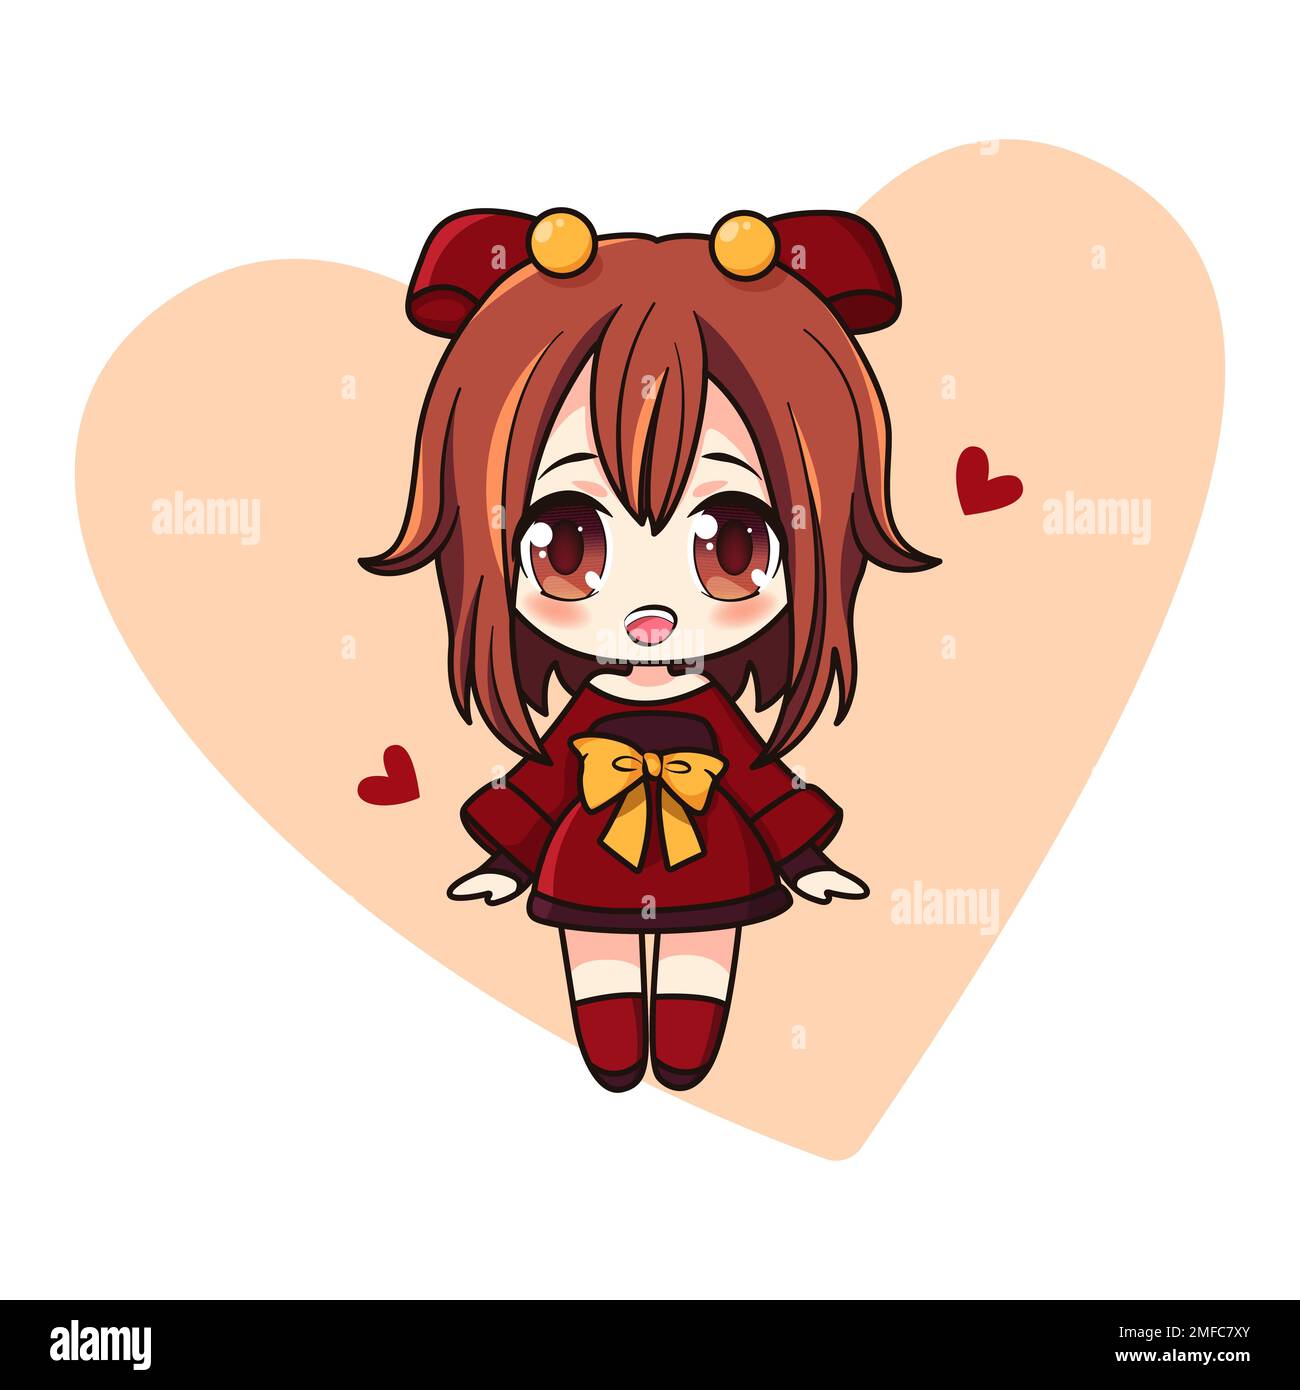 Cute and kawaii girl with red hearts. Manga chibi with hearts. Stock Vector